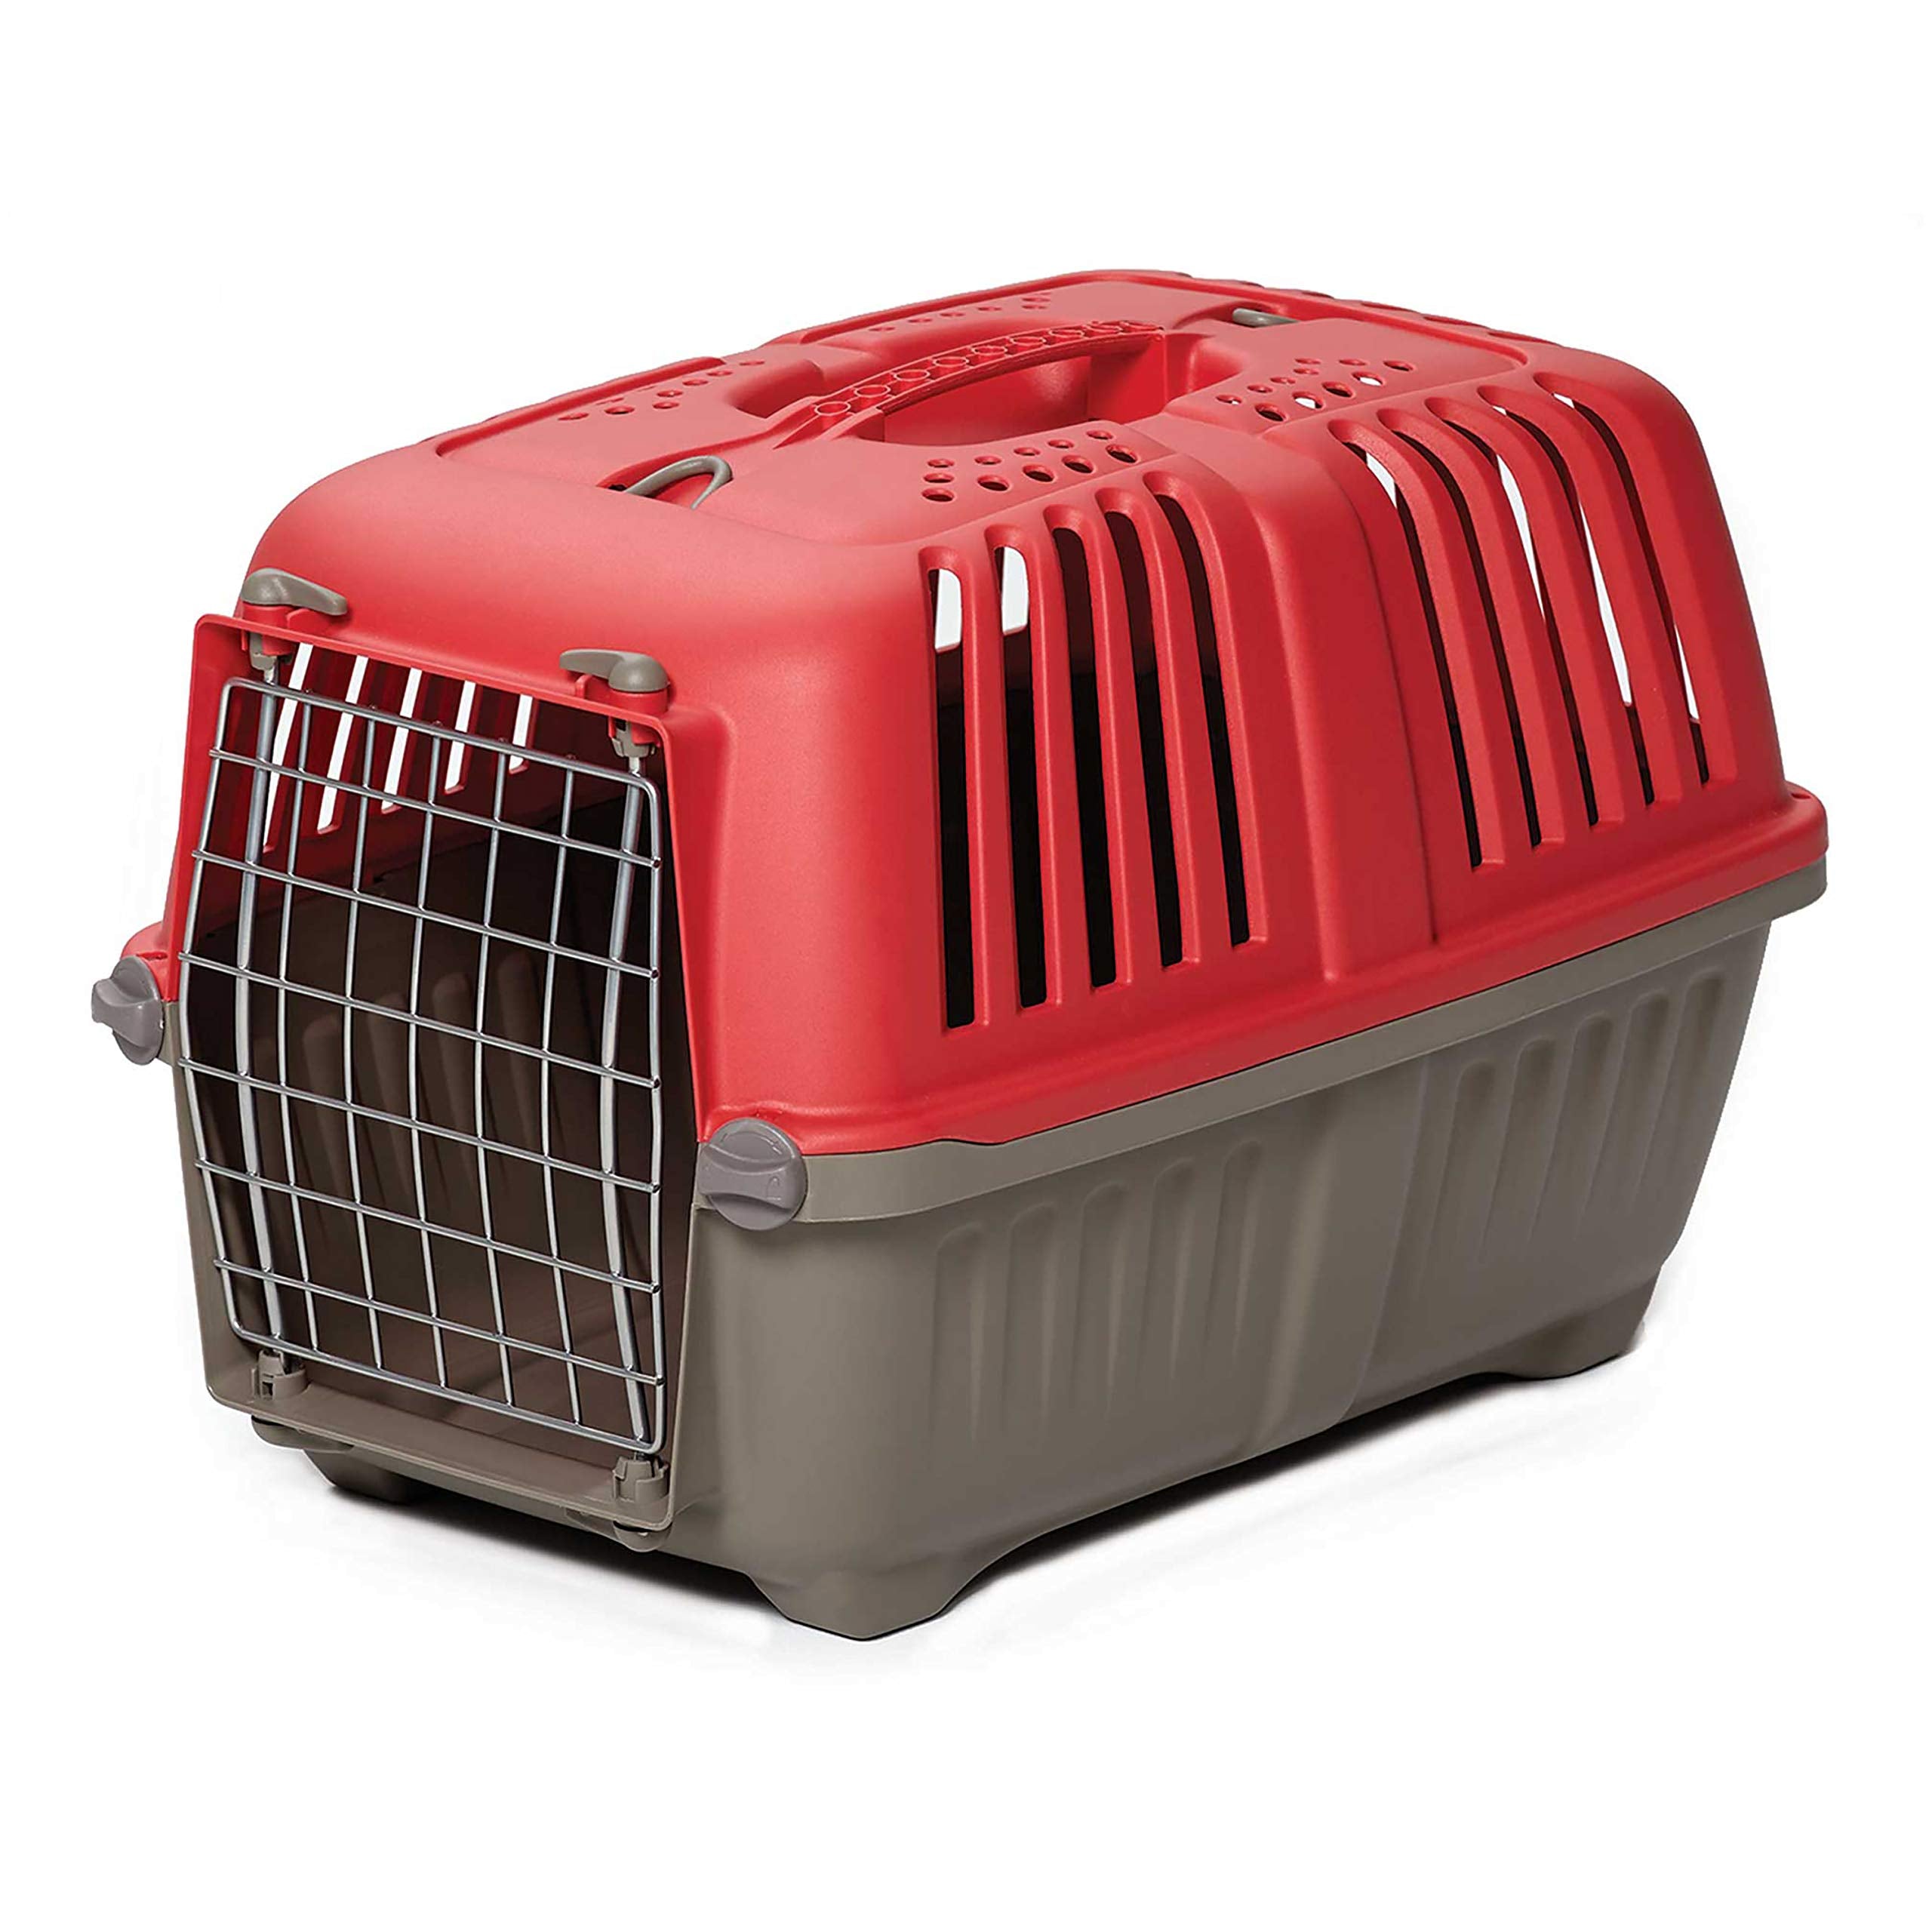 Midwest Spree Hard-Sided Travel Cat and Dog Kennel Carrier - Red - 19